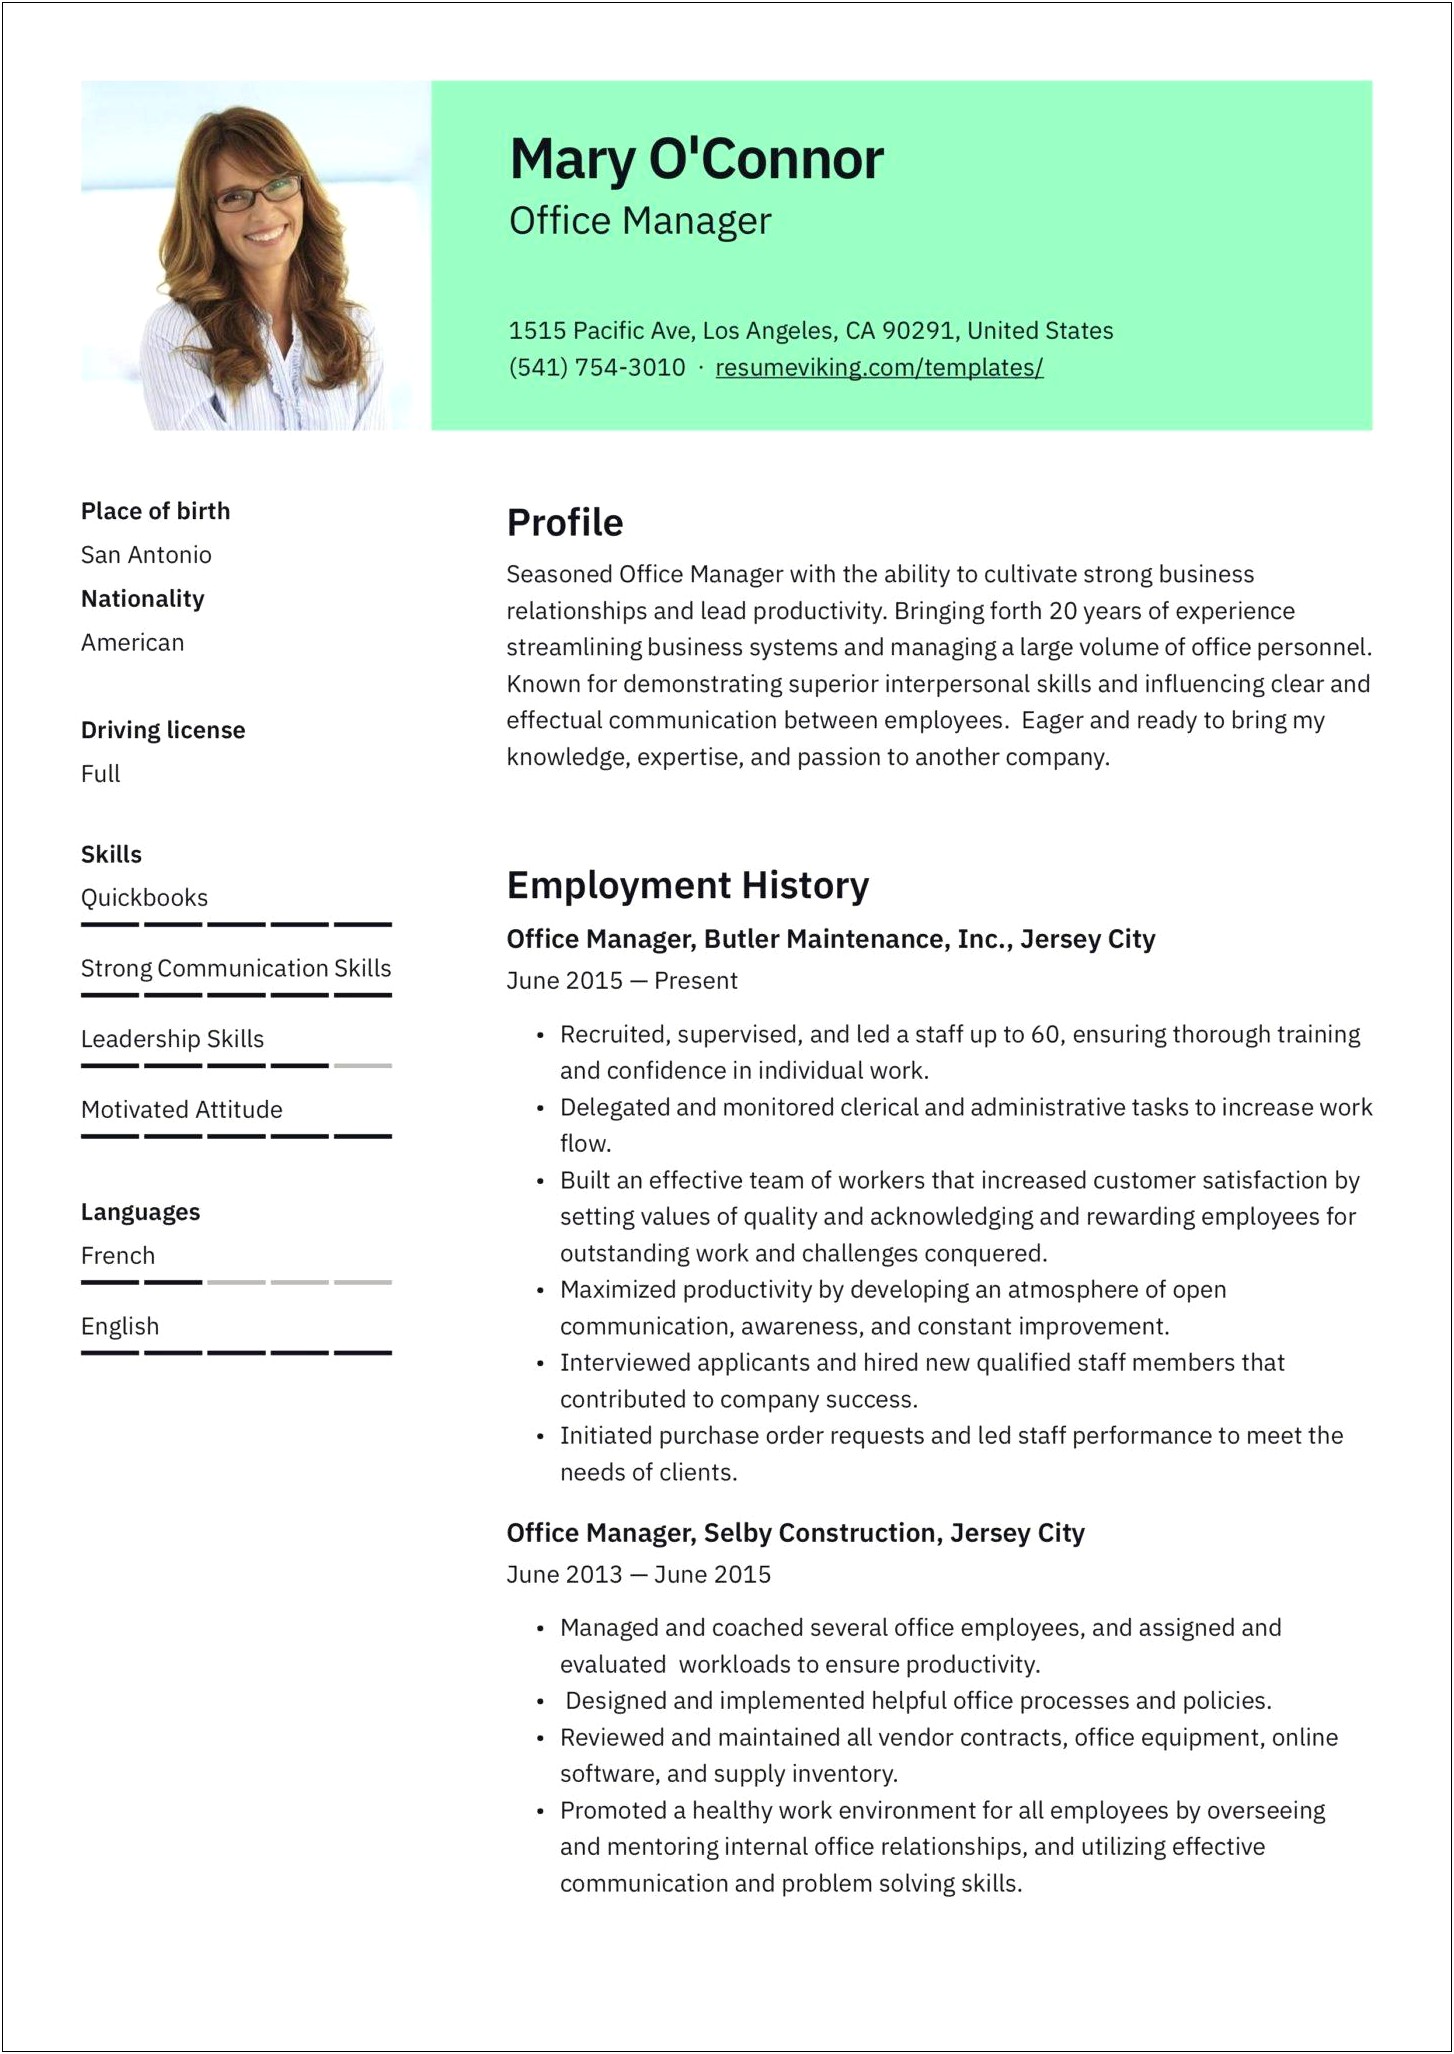 Resume Outline Format Duties And Responsibilities Office Manager